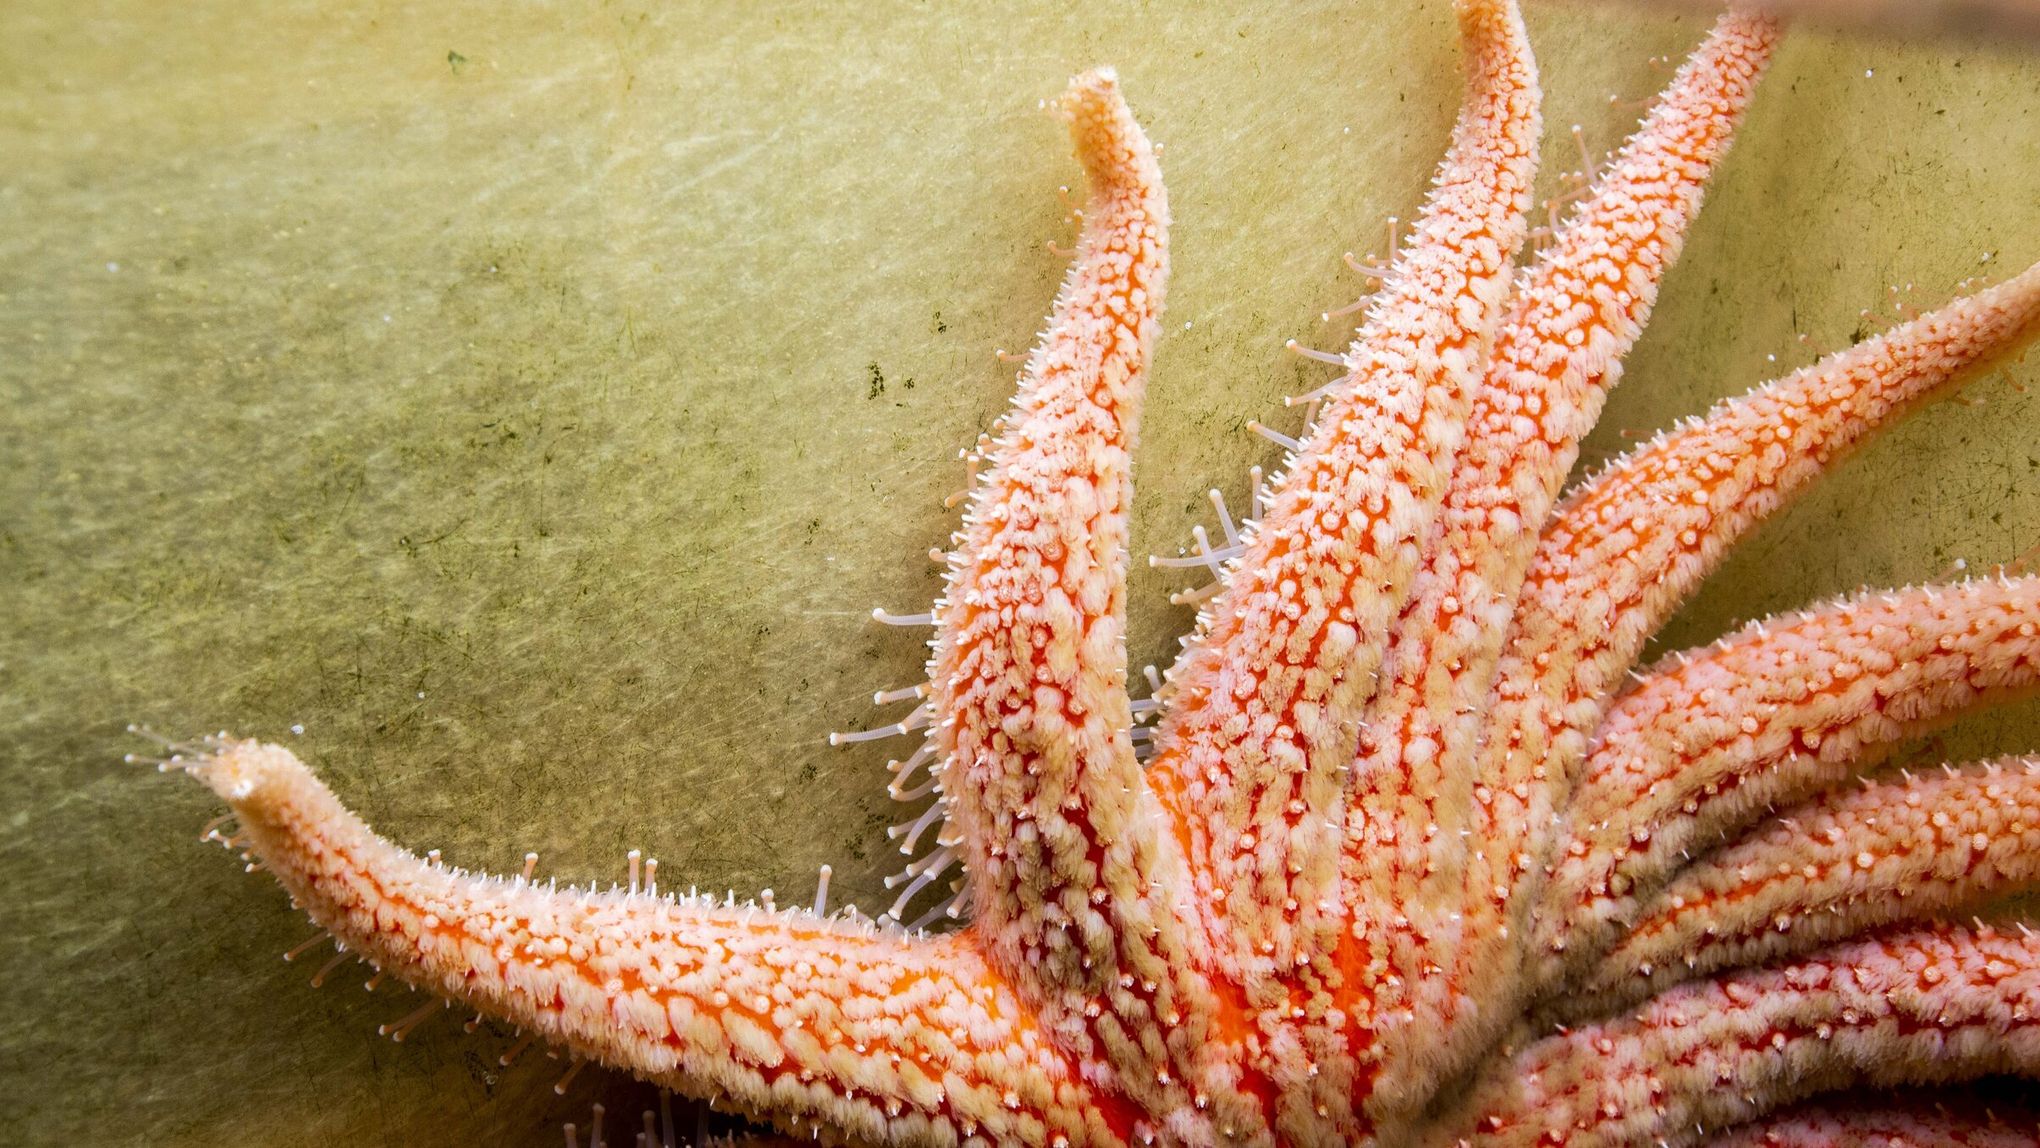 Starfish do not have arms, but a five-pointed head, study says